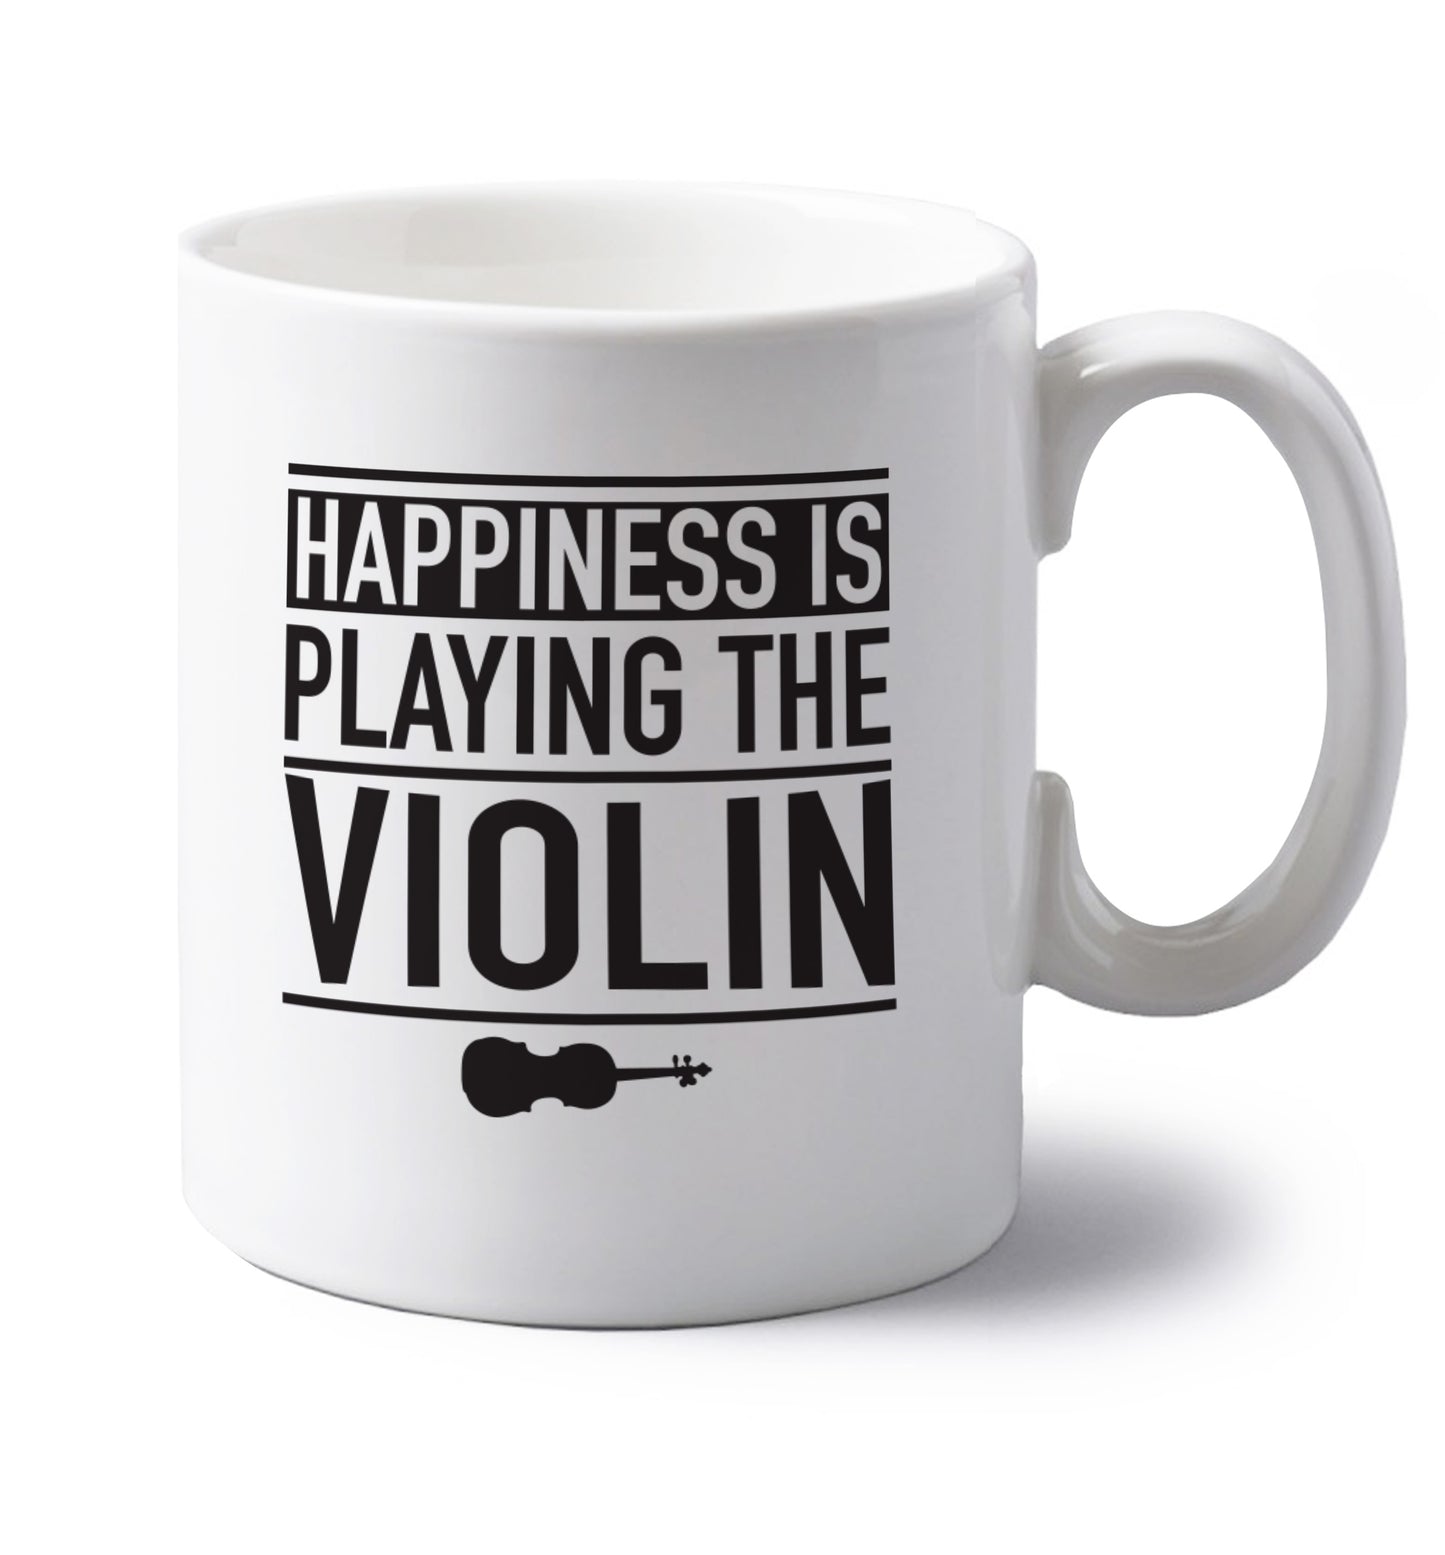 Happiness is playing the violin left handed white ceramic mug 